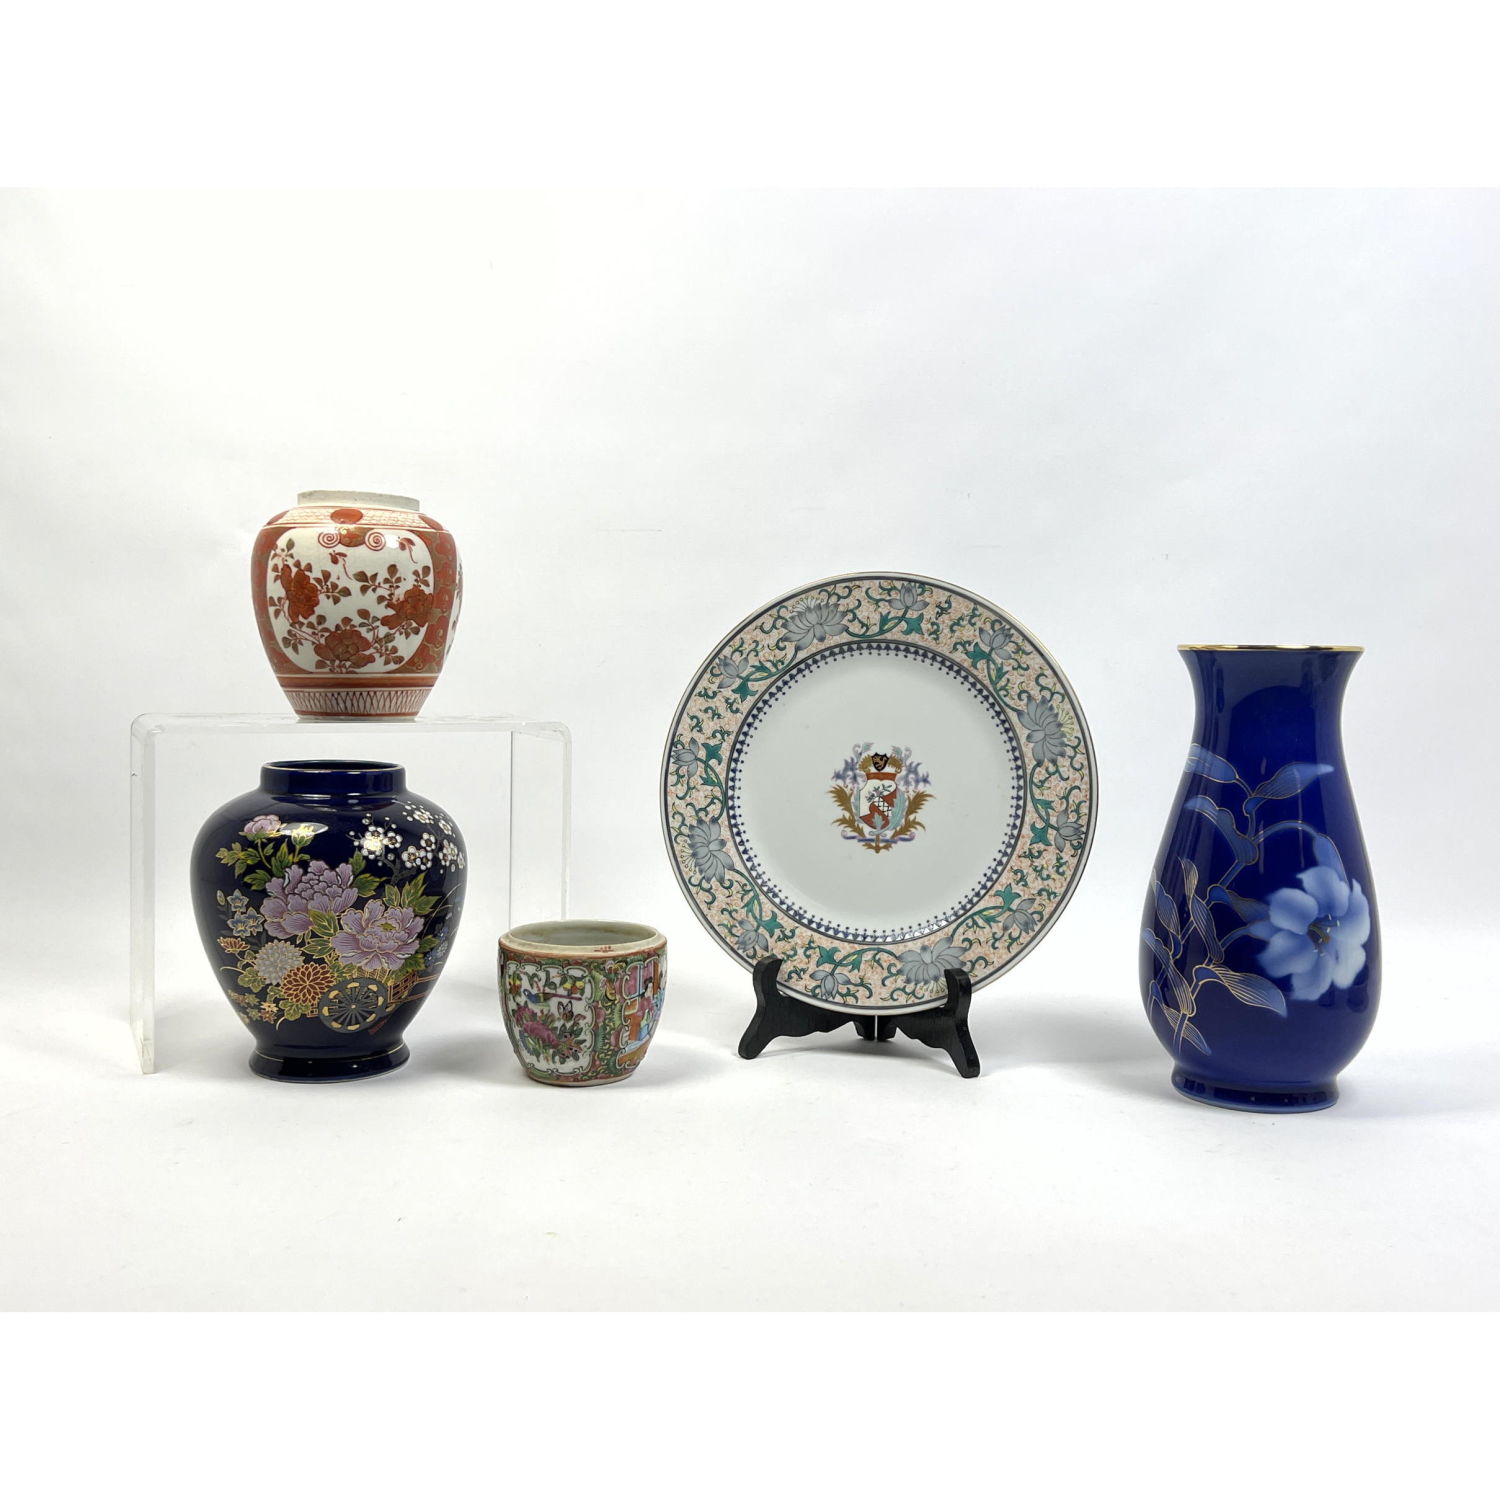 5pc Pottery and Porcelain Wares  2bab96